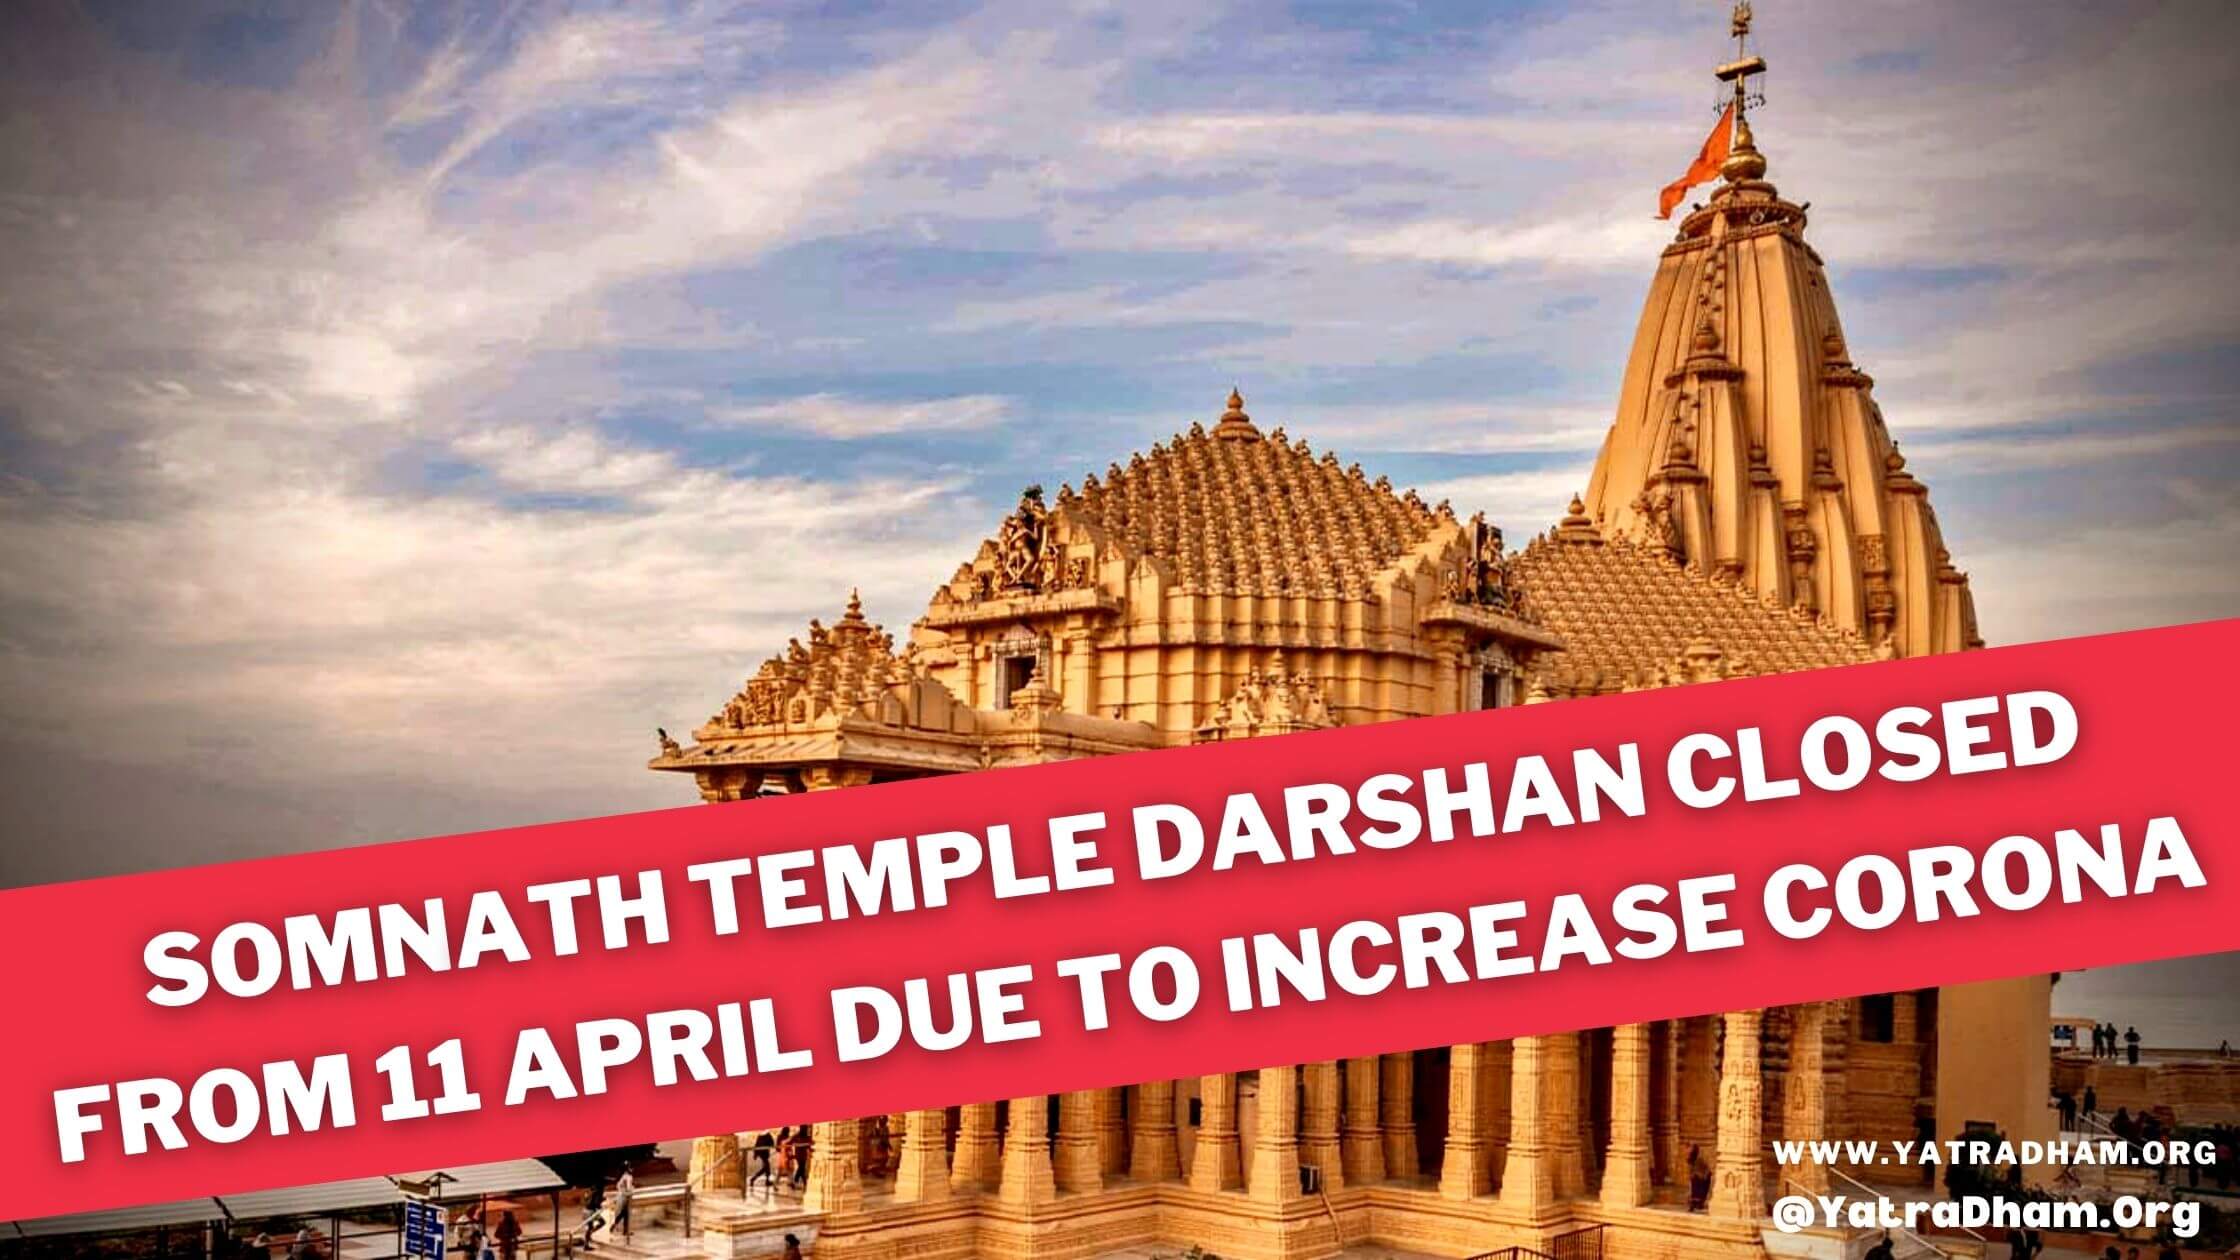 Somnath Temple Darshan Closed From 11 April Due to increase Corona